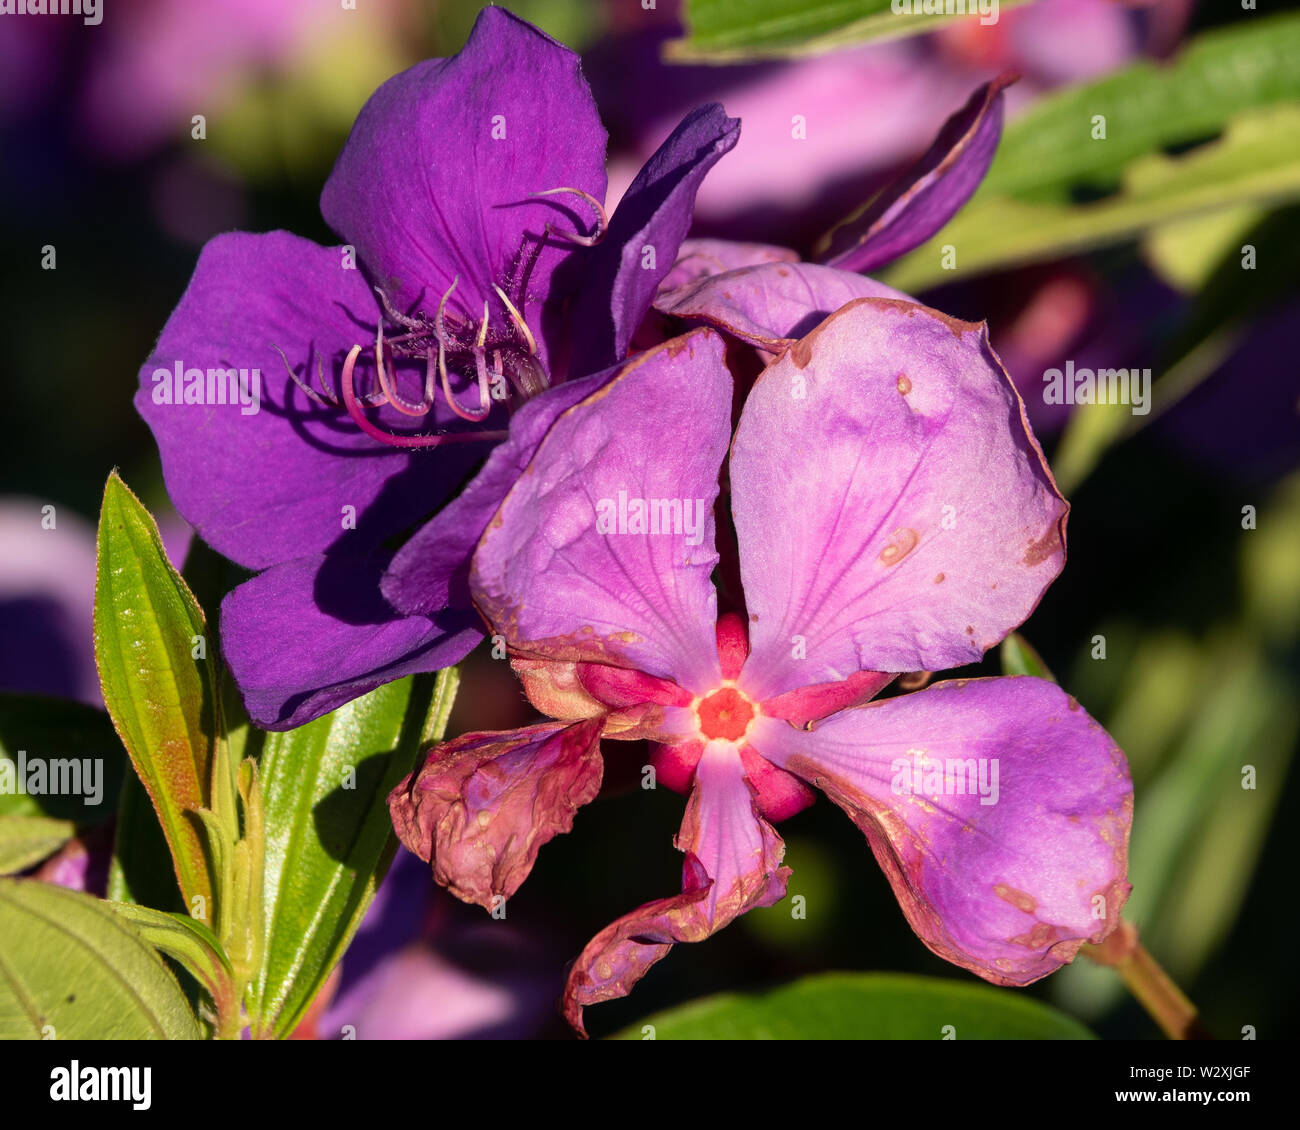 Tibouchina Flowers also know as Princess flowers or Glory Bush, One fresh and vibrant, one wilted, shrivelling and dying Stock Photo